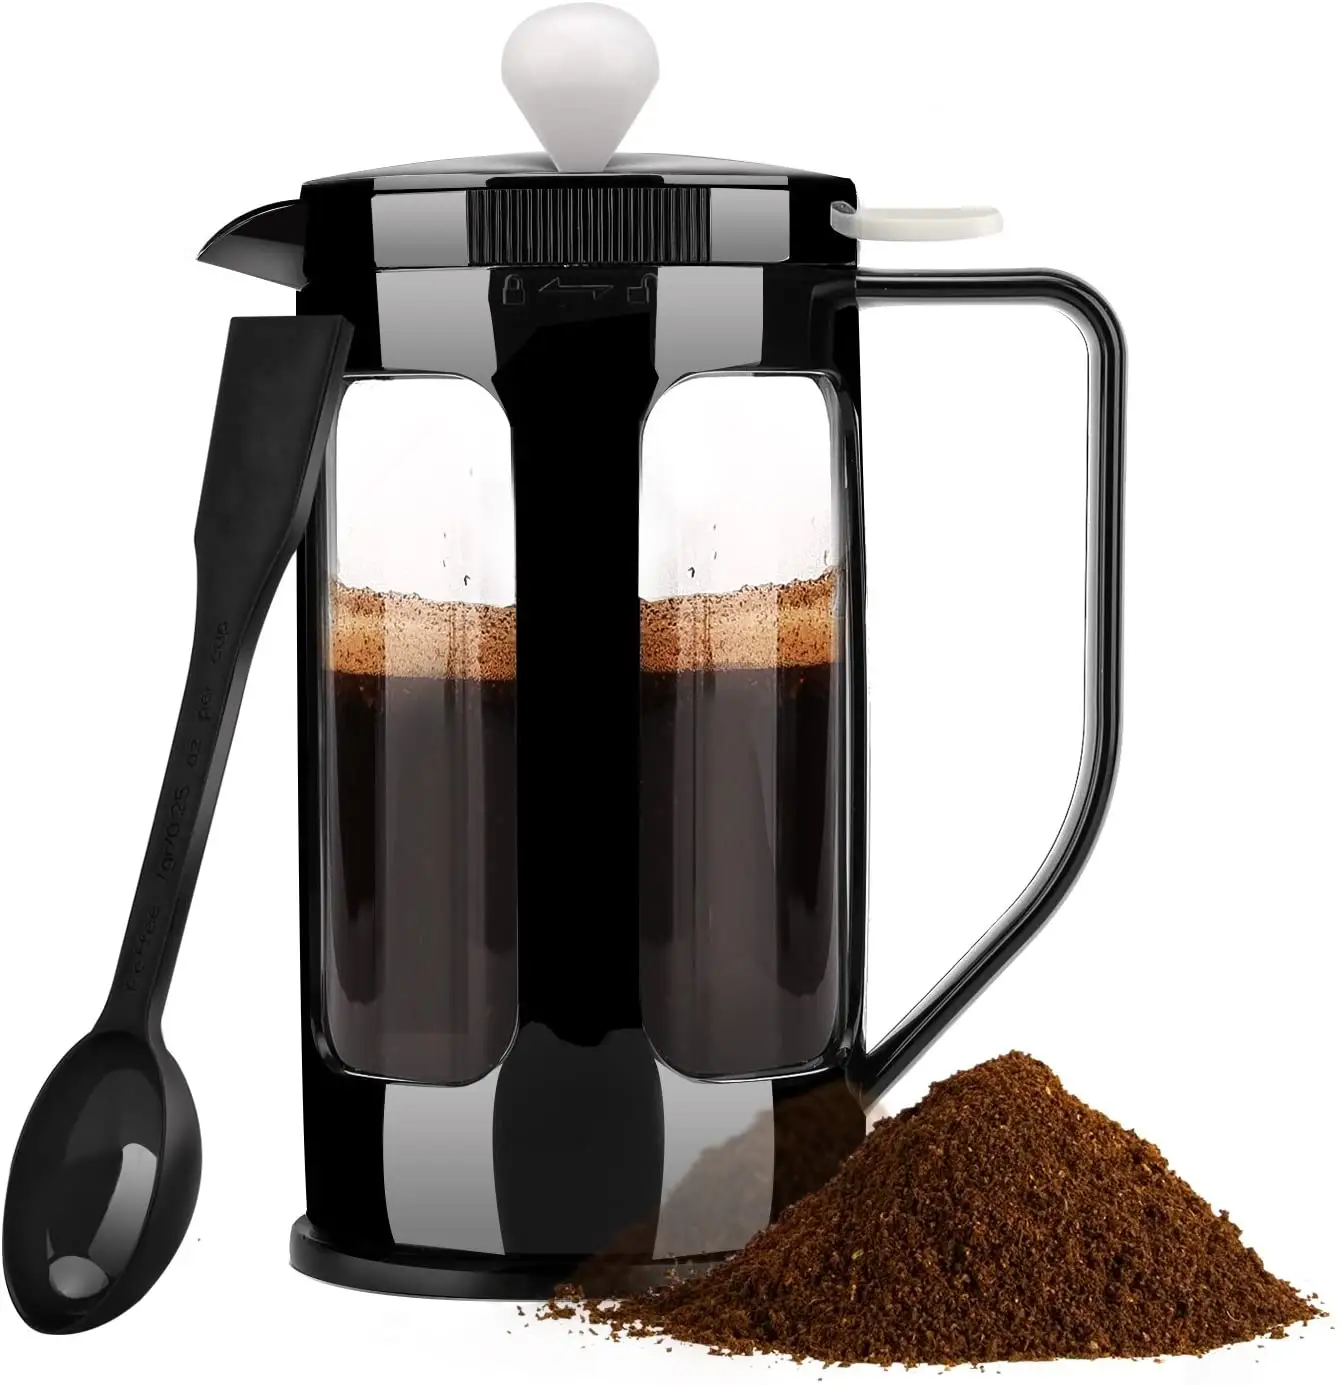 Large Capacity French Press with Heat Resistant Borosilicate Glass Carafe and Stainless Steel Filter, Black